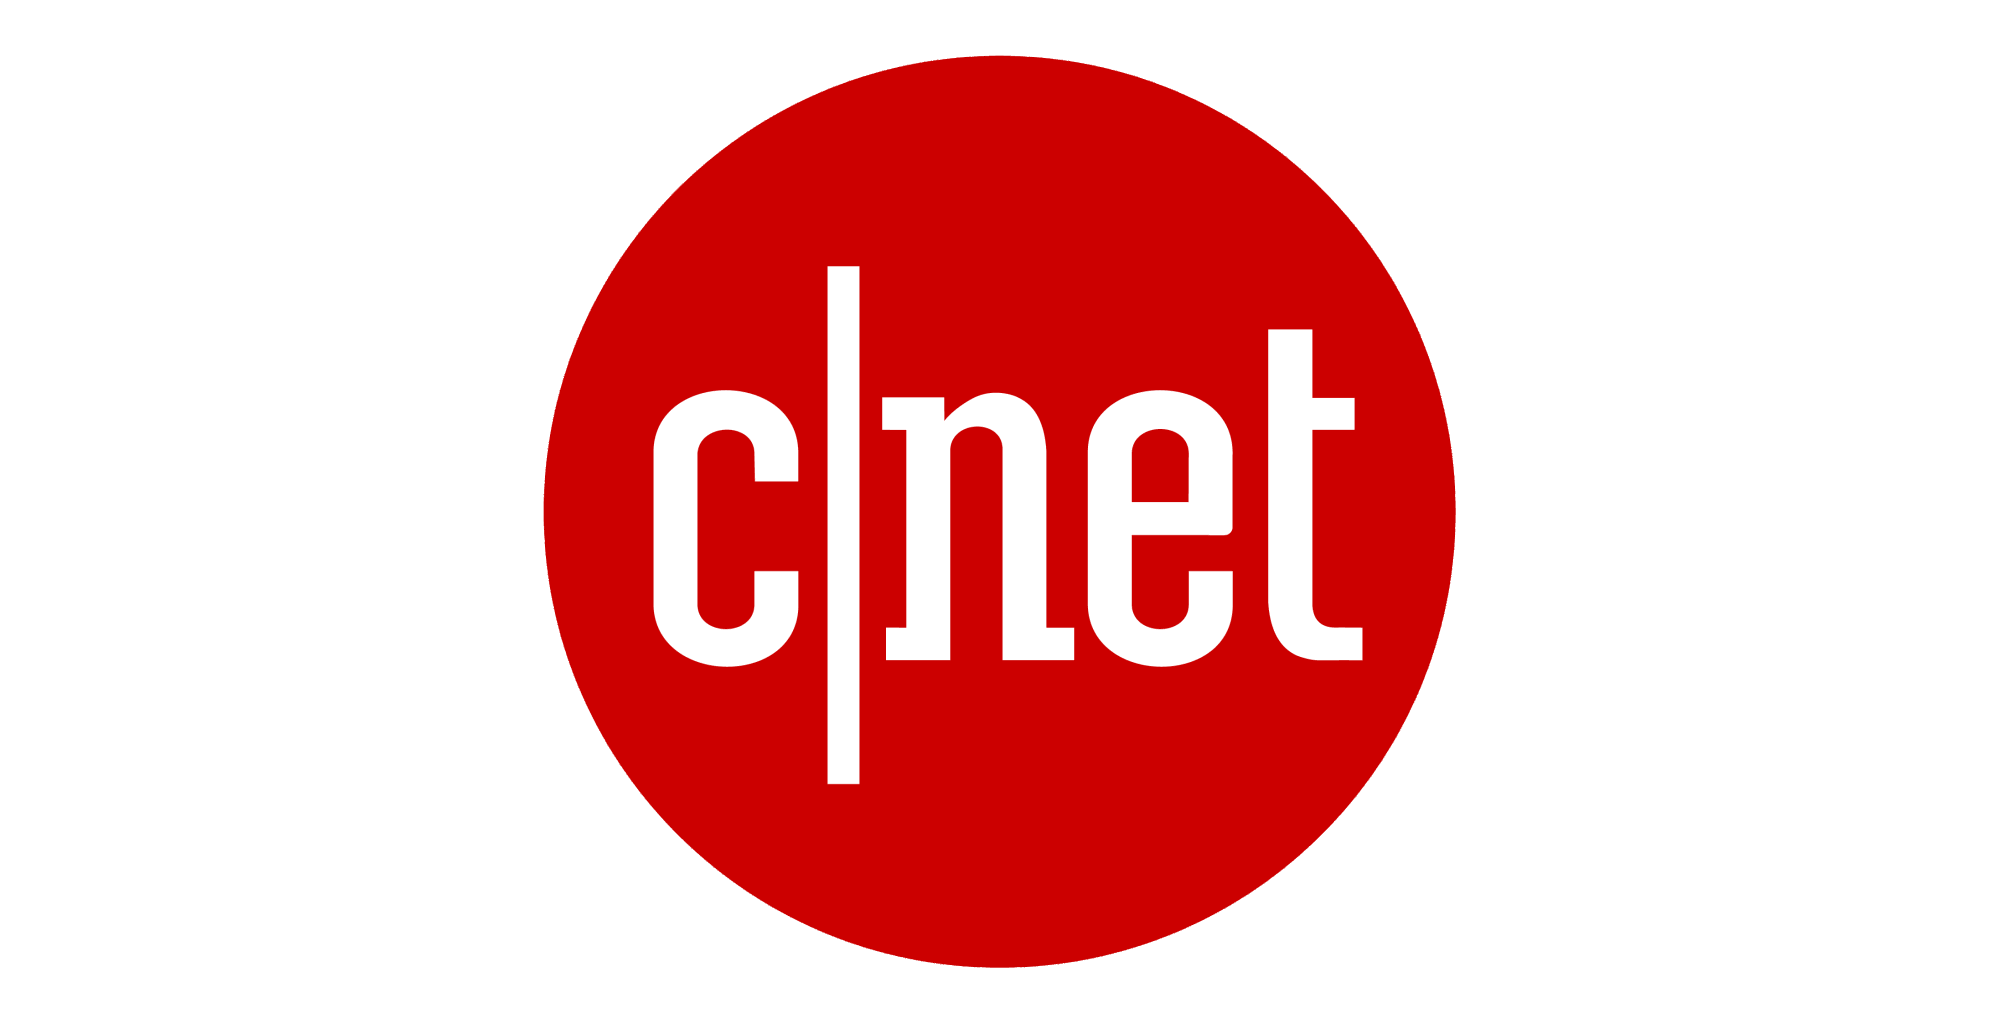 CNET.png